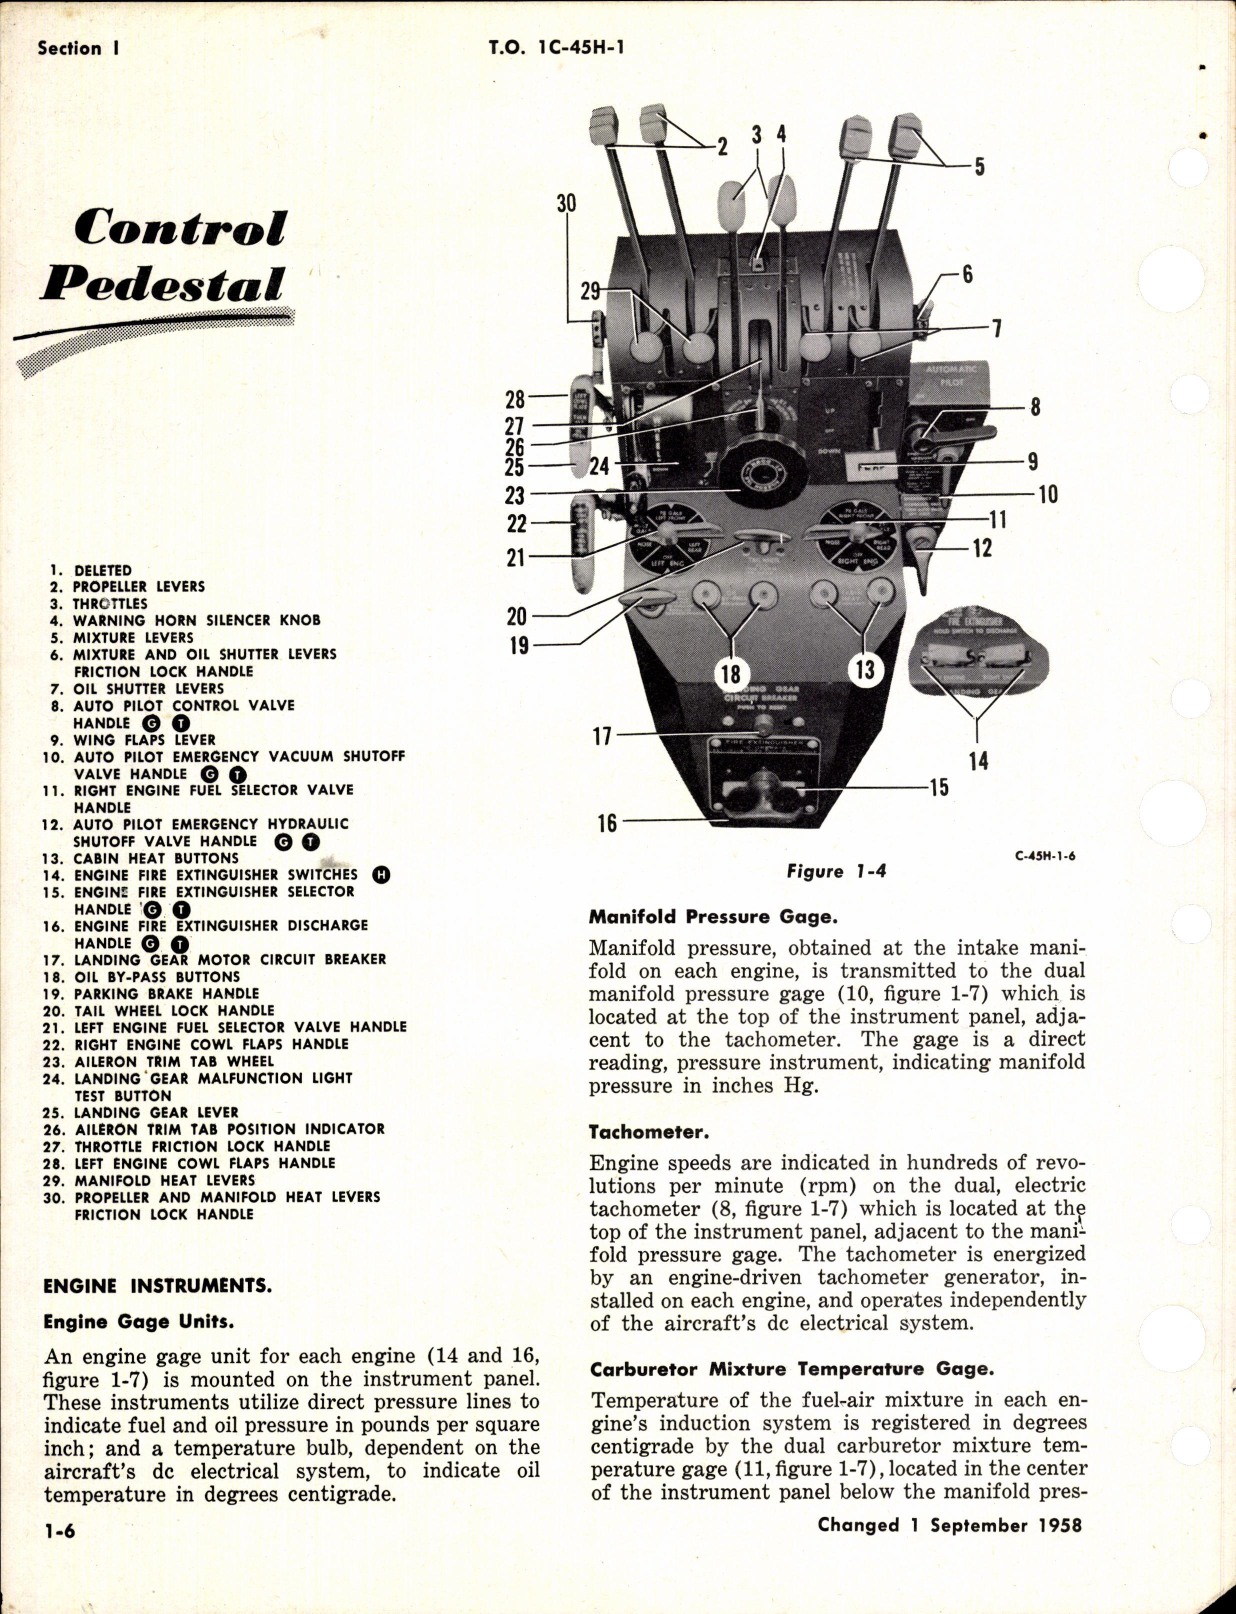 Sample page 6 from AirCorps Library document: Flight Manual for TC-45H and C-45H